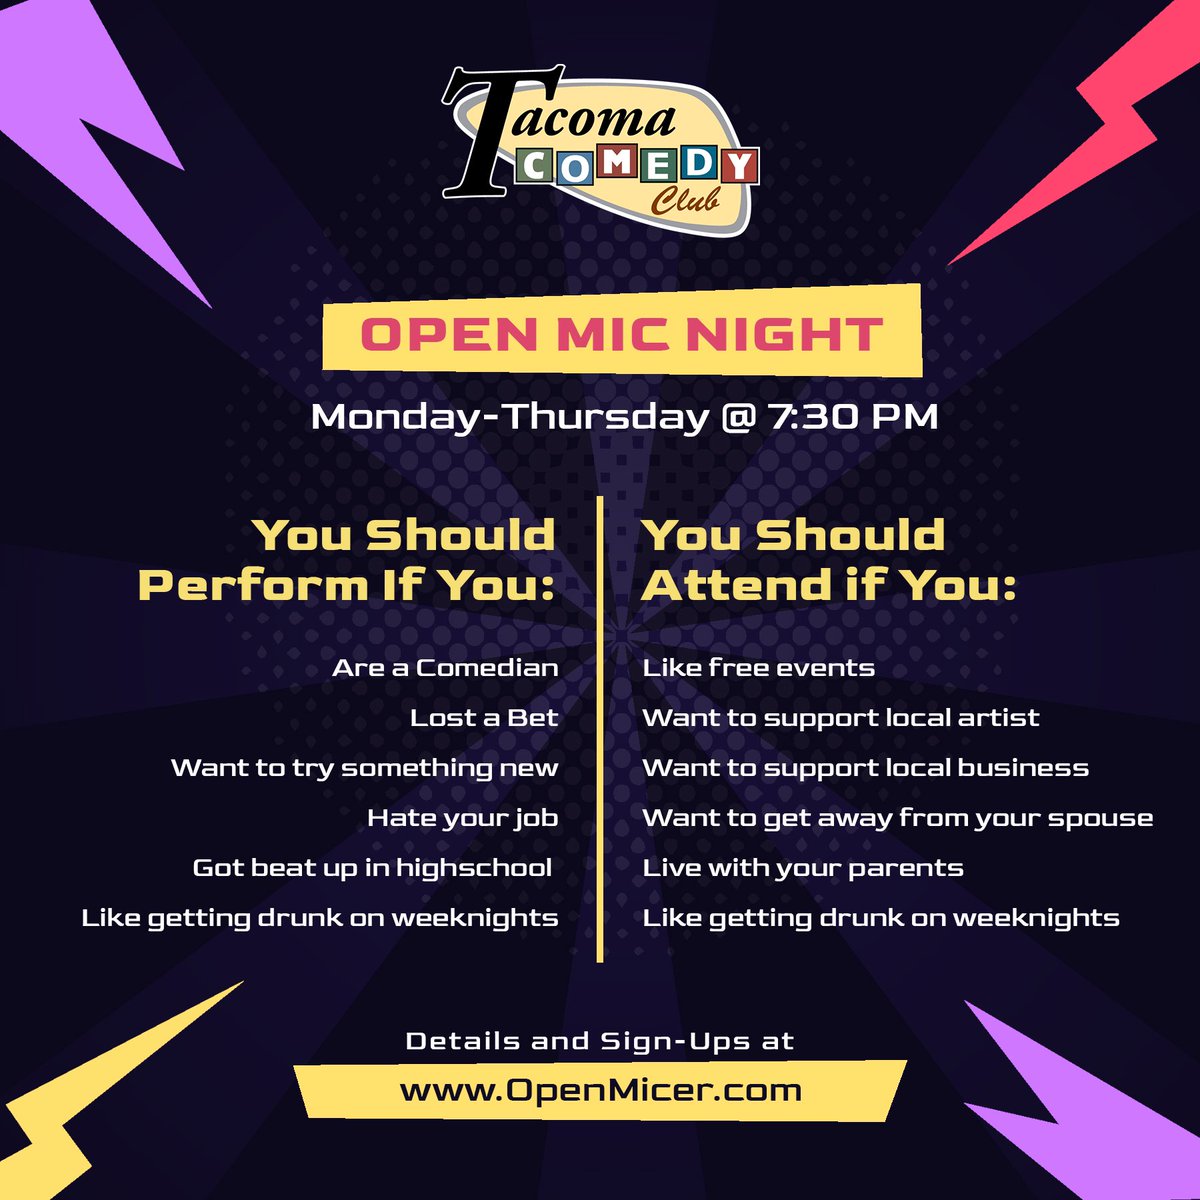 Open mic nights are always a great time! Come join us and connect with your fav local comedians.